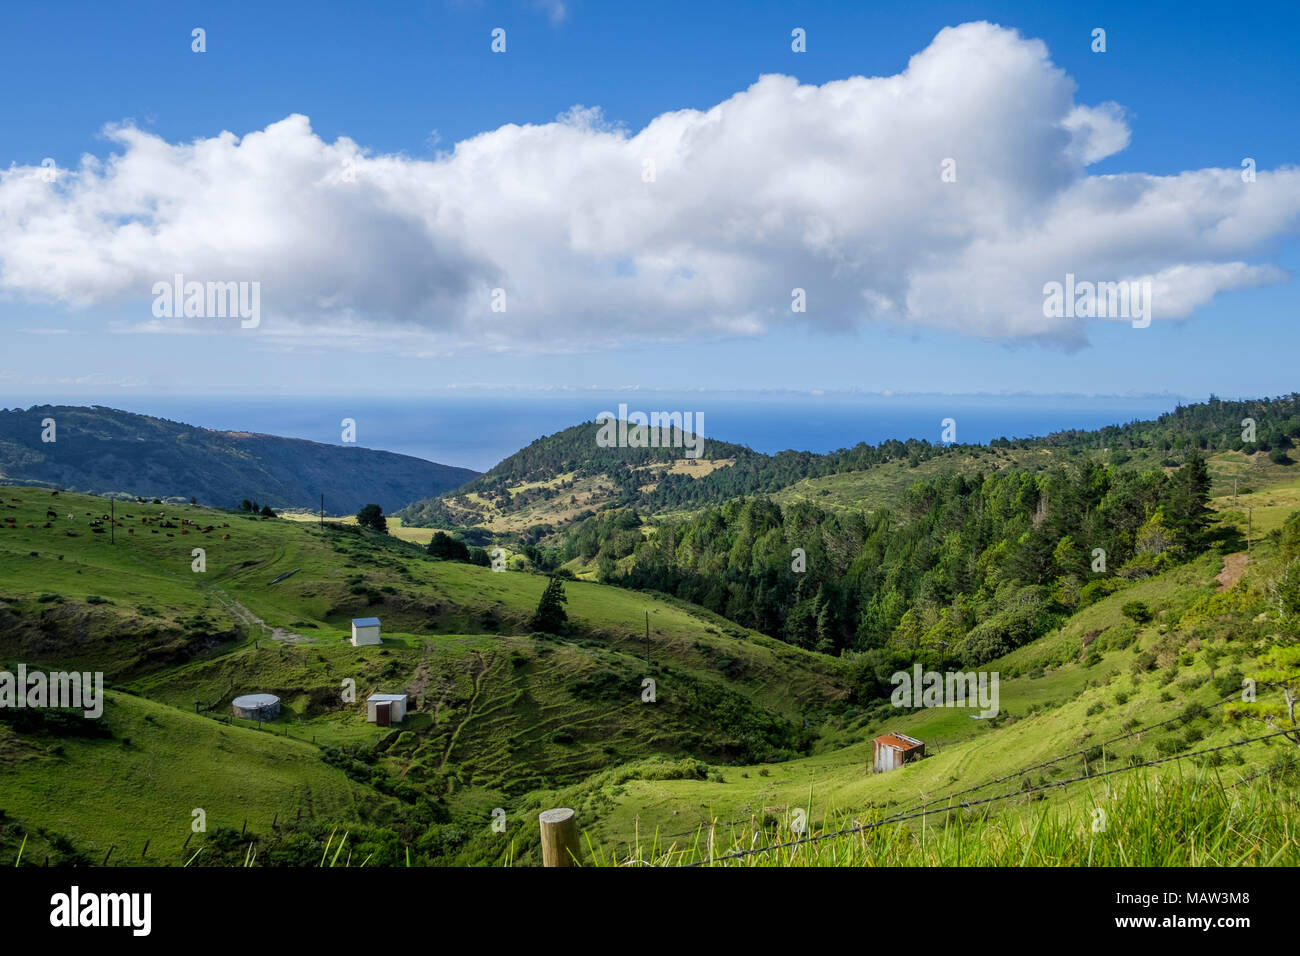 Countryside of Saint Helena, a British Overseas Territory in the South Atlantic Ocean. Stock Photo